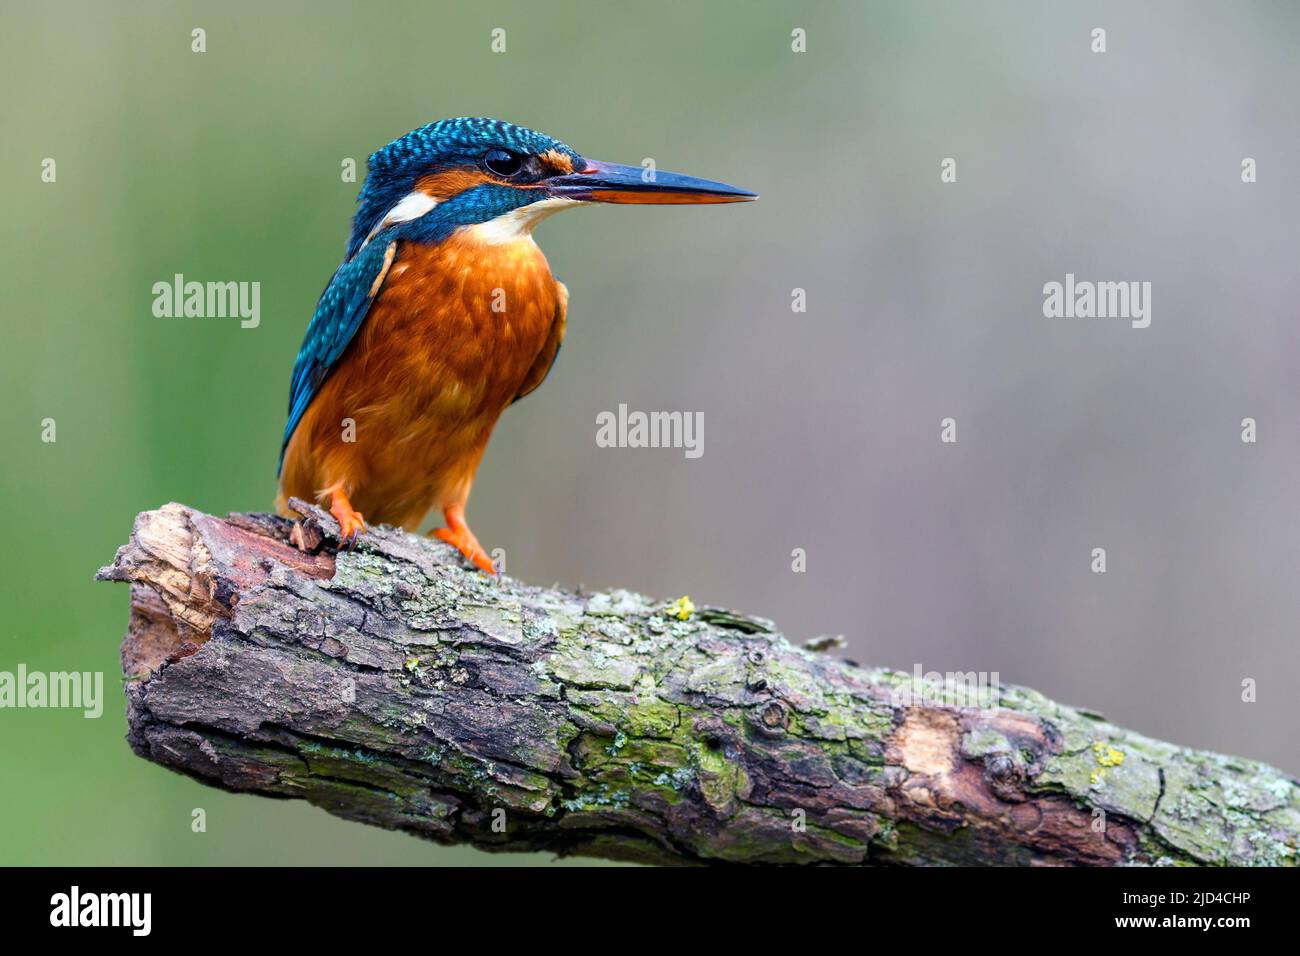 Common kingfisher (Alcedo atthis) from Leicestershire, UK. Stock Photo